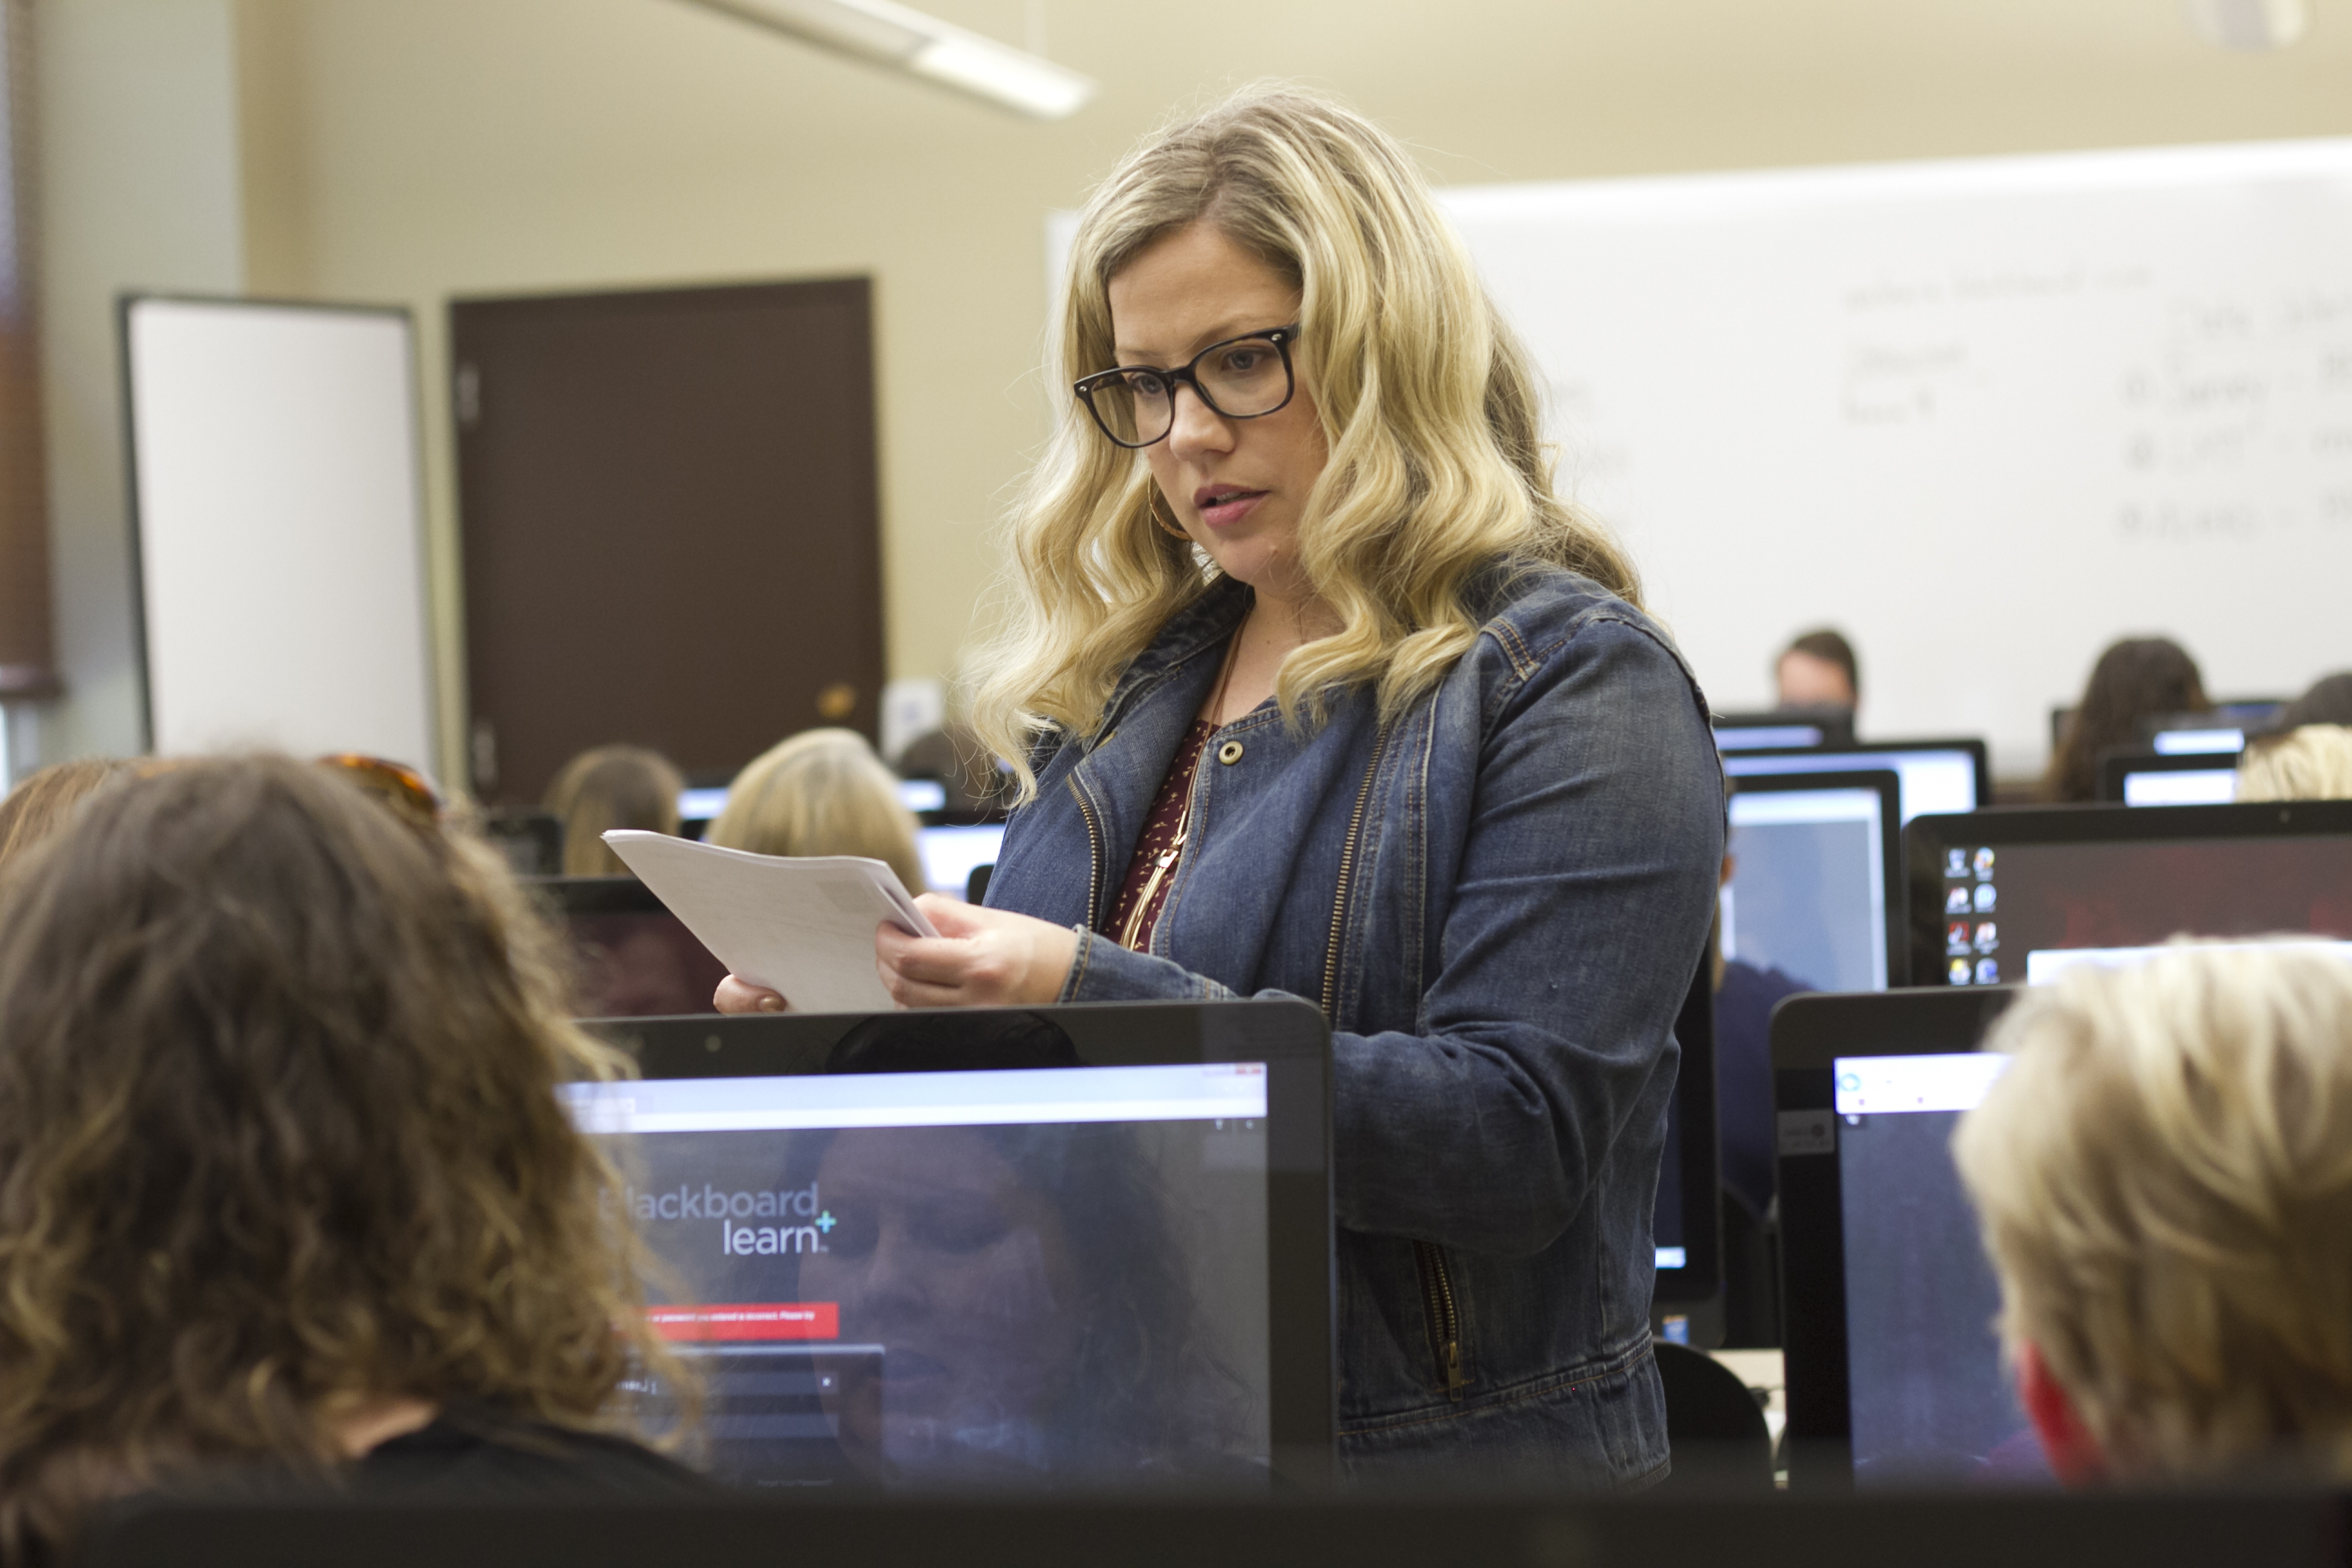 UA Researchers Complete Co-Teaching Training with Area Educators